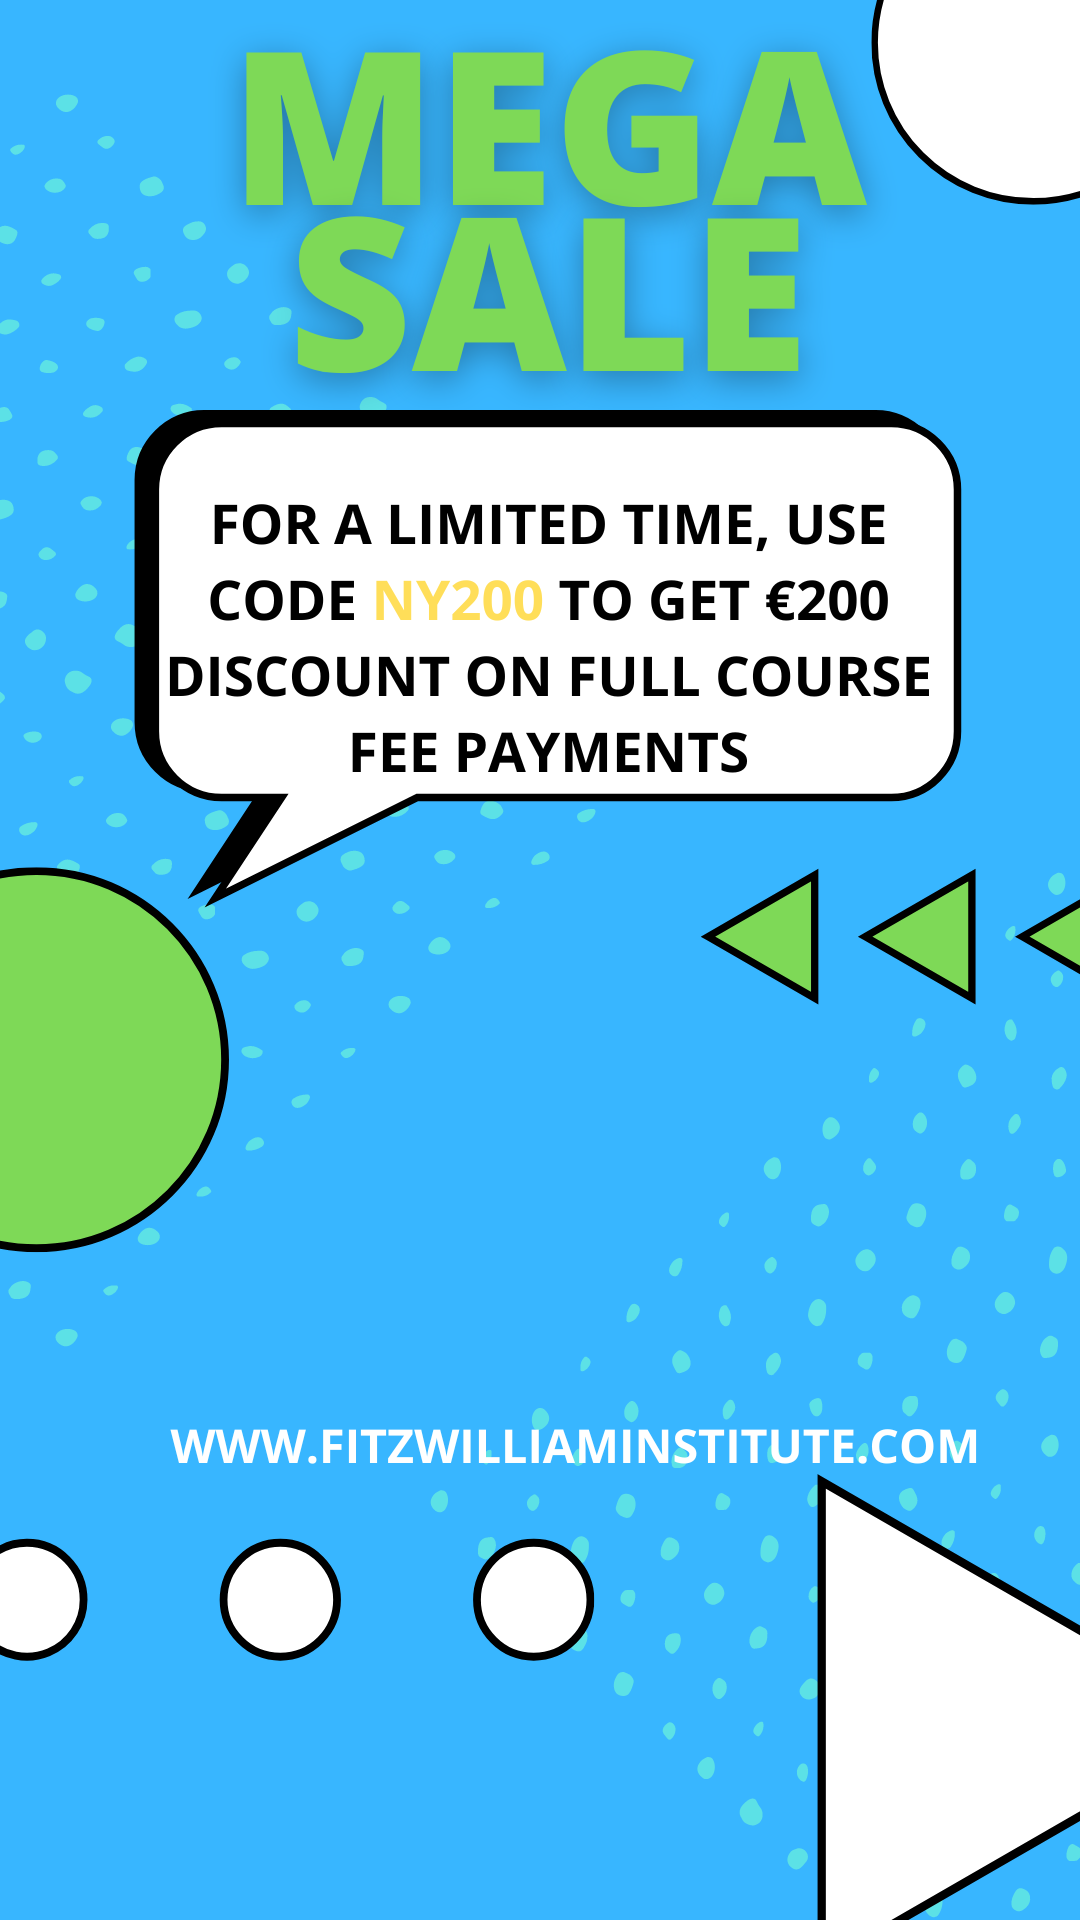 For-a-limited-time-use-code-NY200-to-get-200-Discount-on-full-course-fee-payments.png